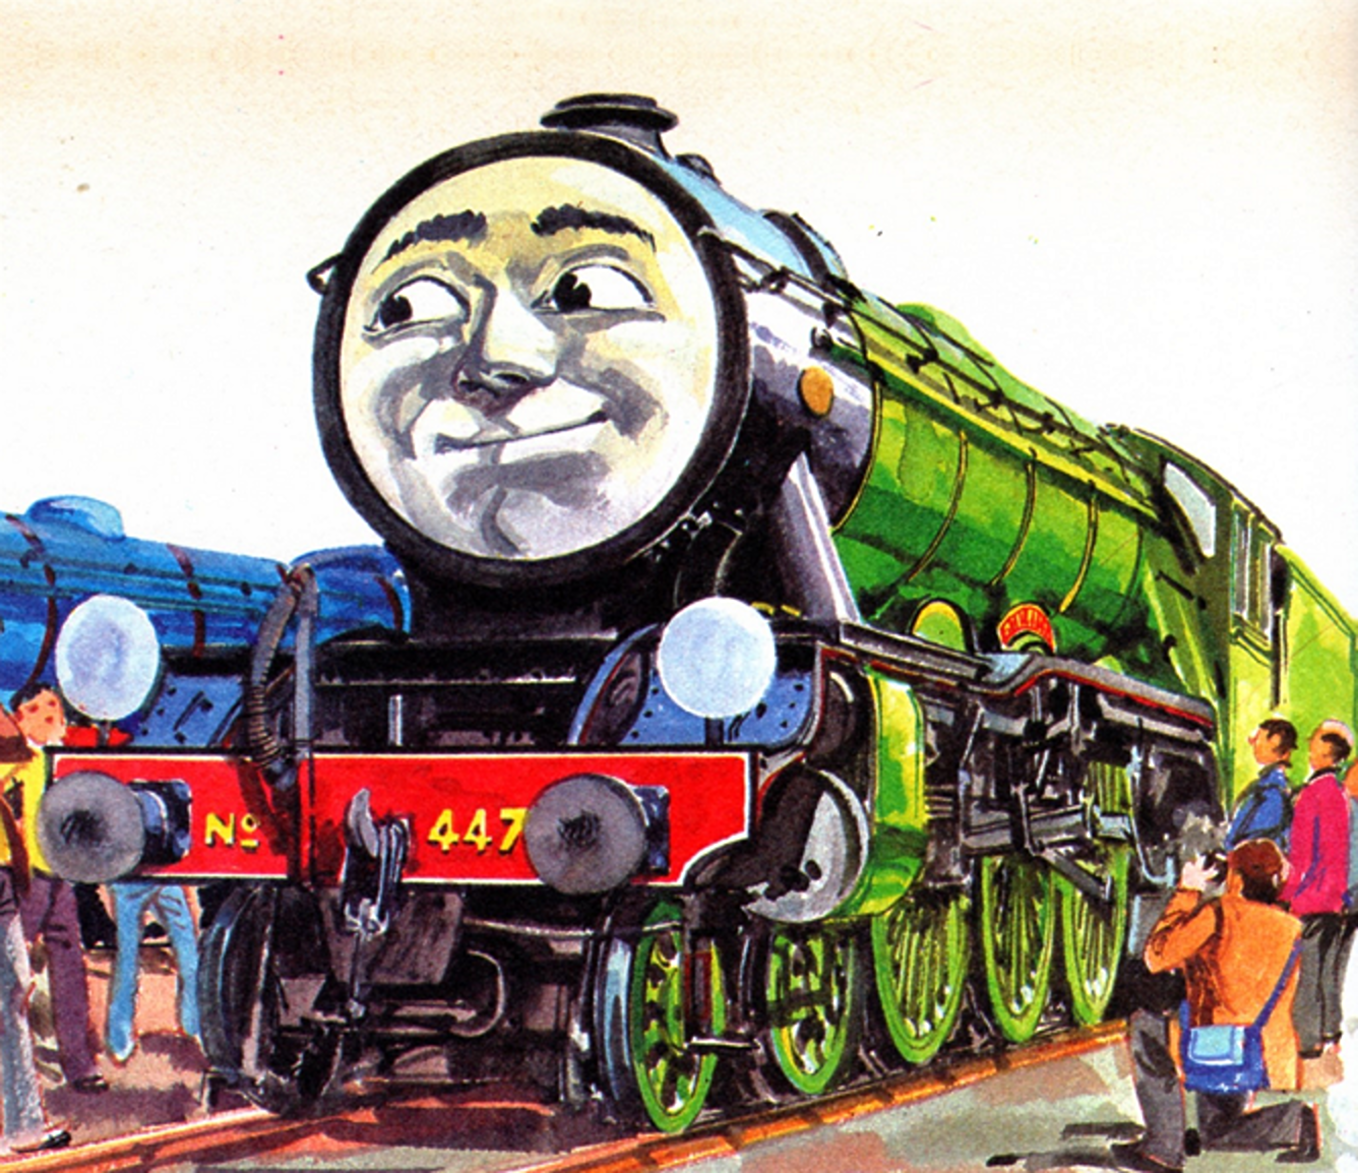 thomas and friends flying scotsman